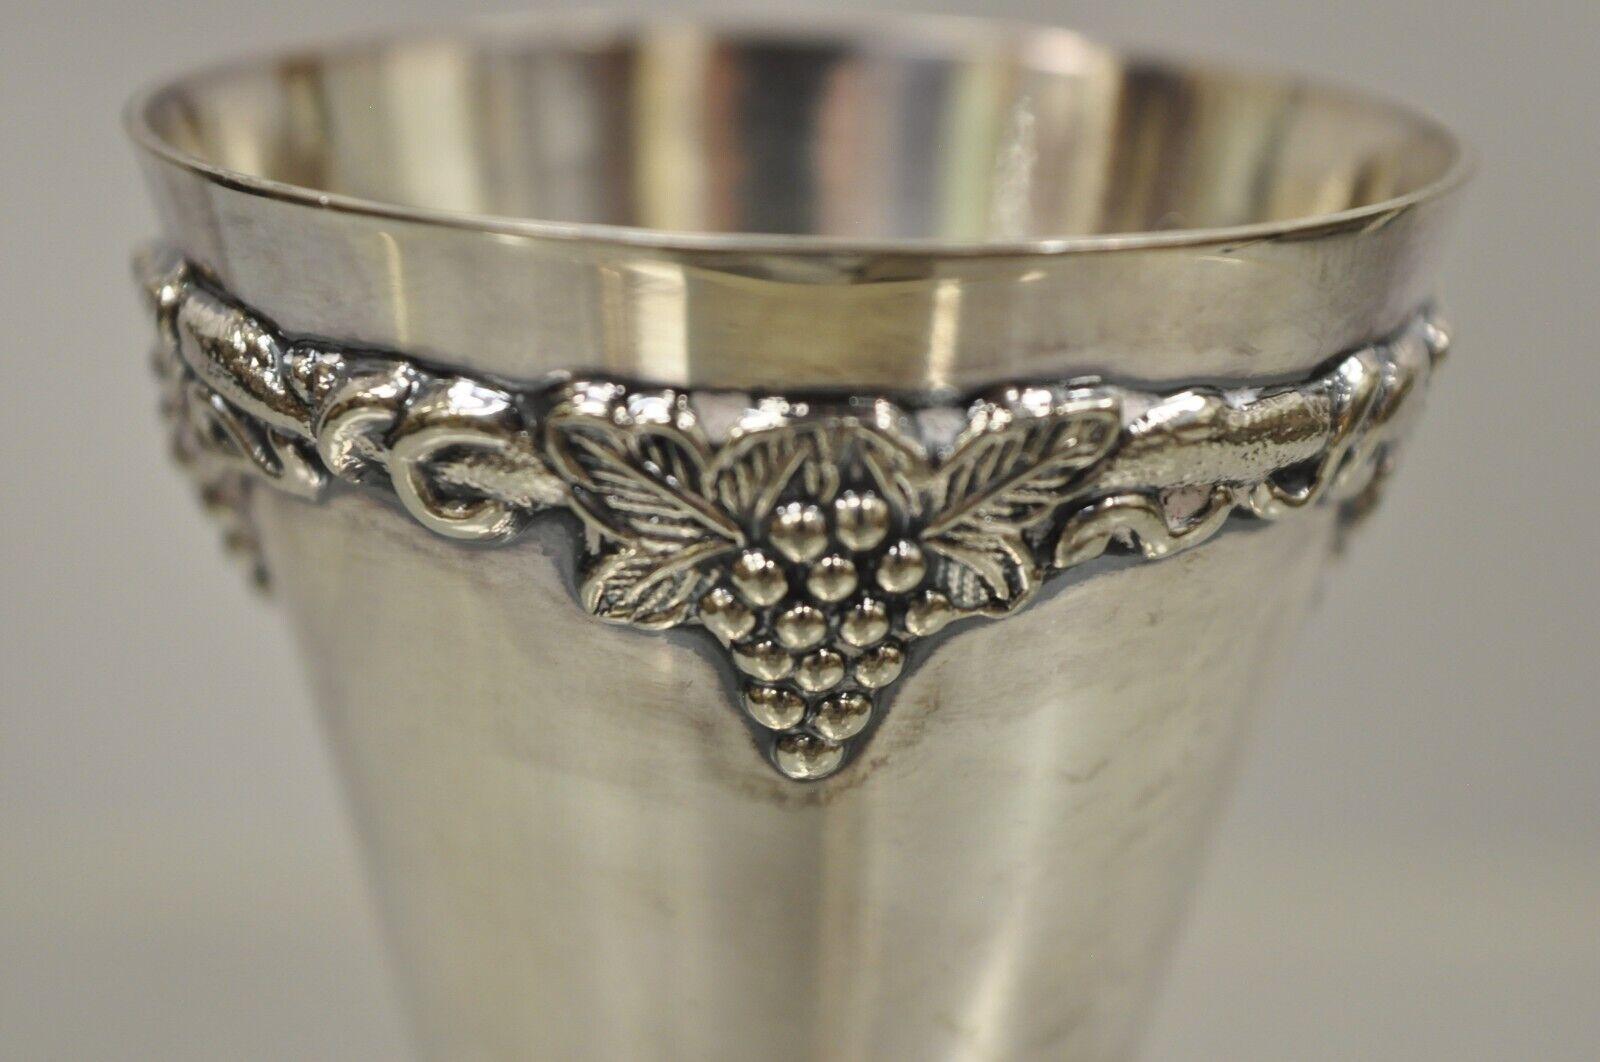 Victorian Antique Old English Repro Silver Plated Sherry Wine Liquor Goblet Cups Set of 2